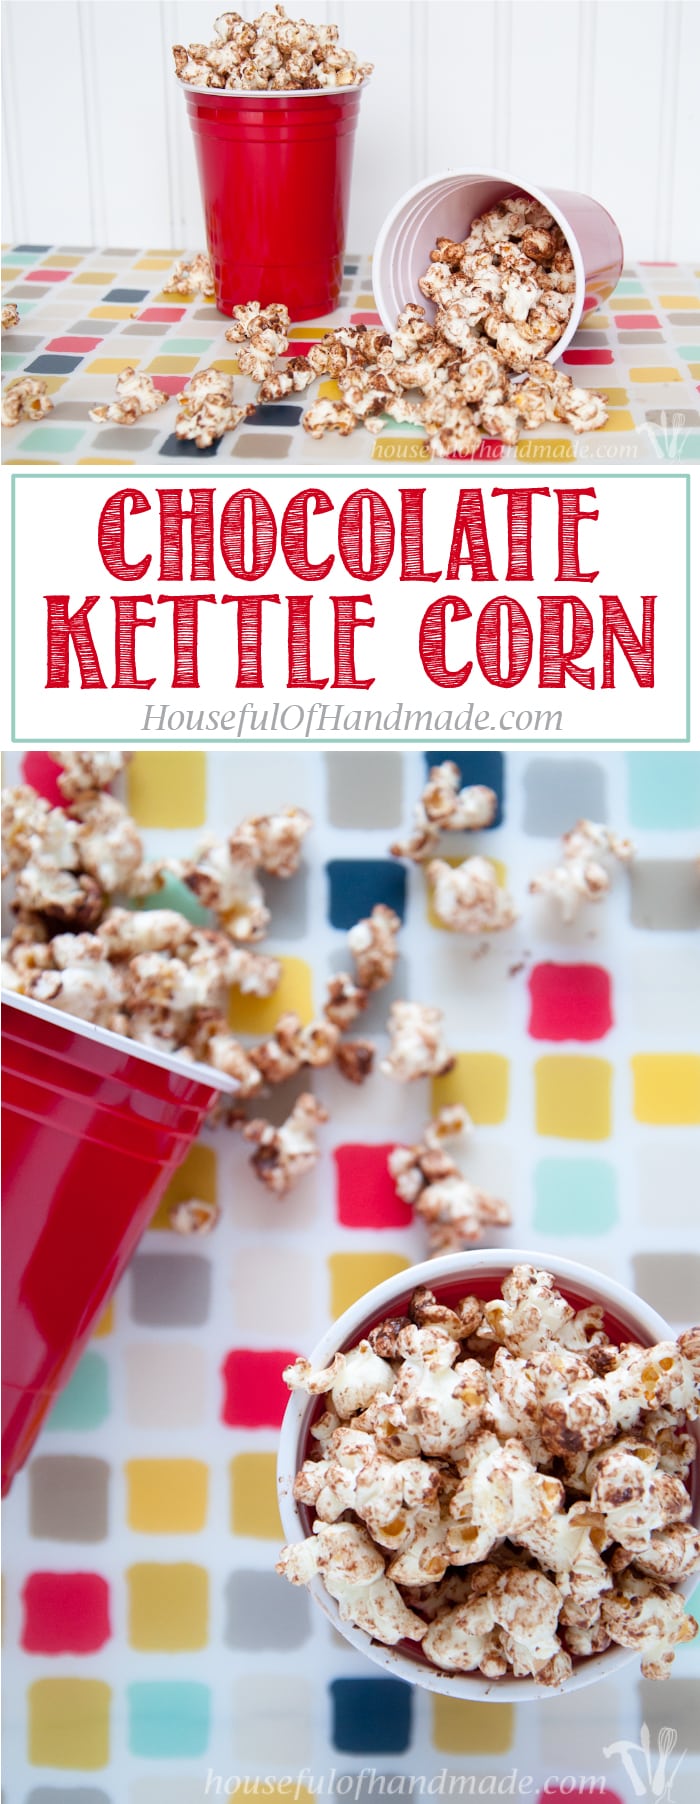 14 Days of Popcorn Day 2: Here is a sweet chocolatey treat that is a little healthier! This chocolate kettle corn is perfect for your sugar cravings. | Housefulofhandmade.com